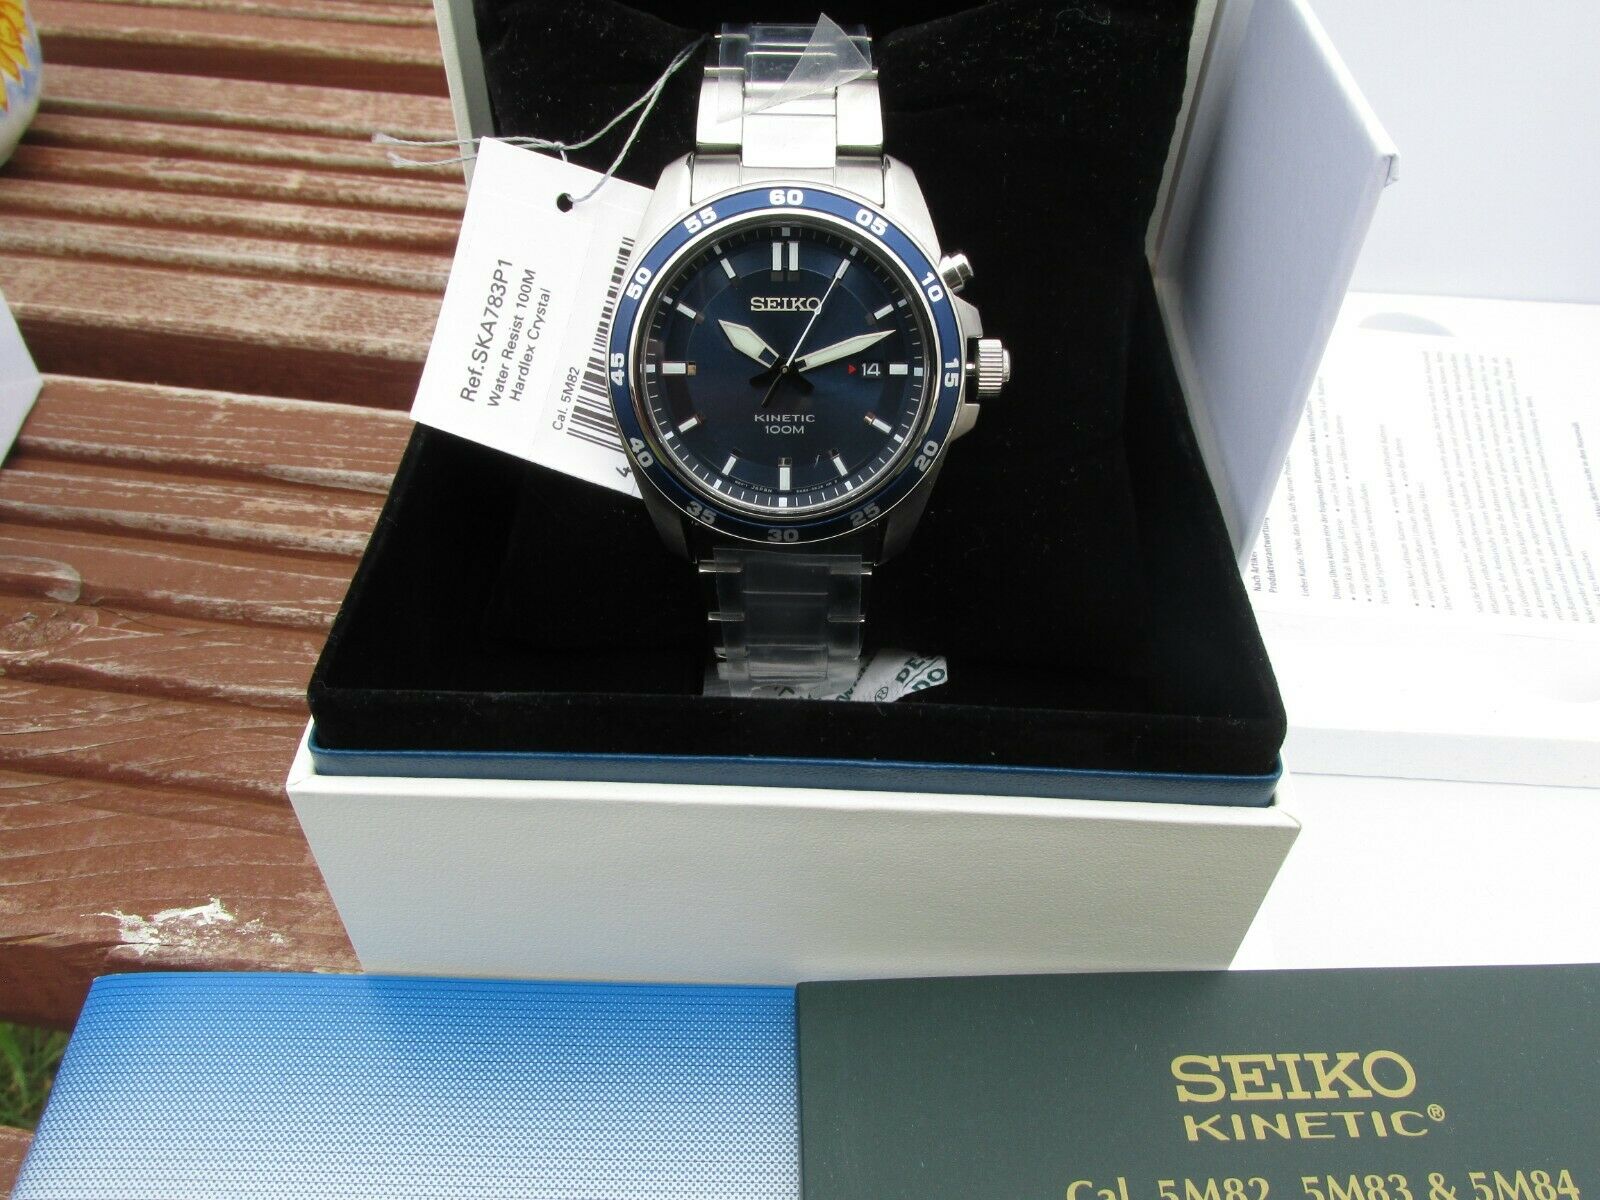 Superb SEIKO Kinetic SKA783P1 Blue boxes dial watch and Brand WatchCharts | all NEW booklets